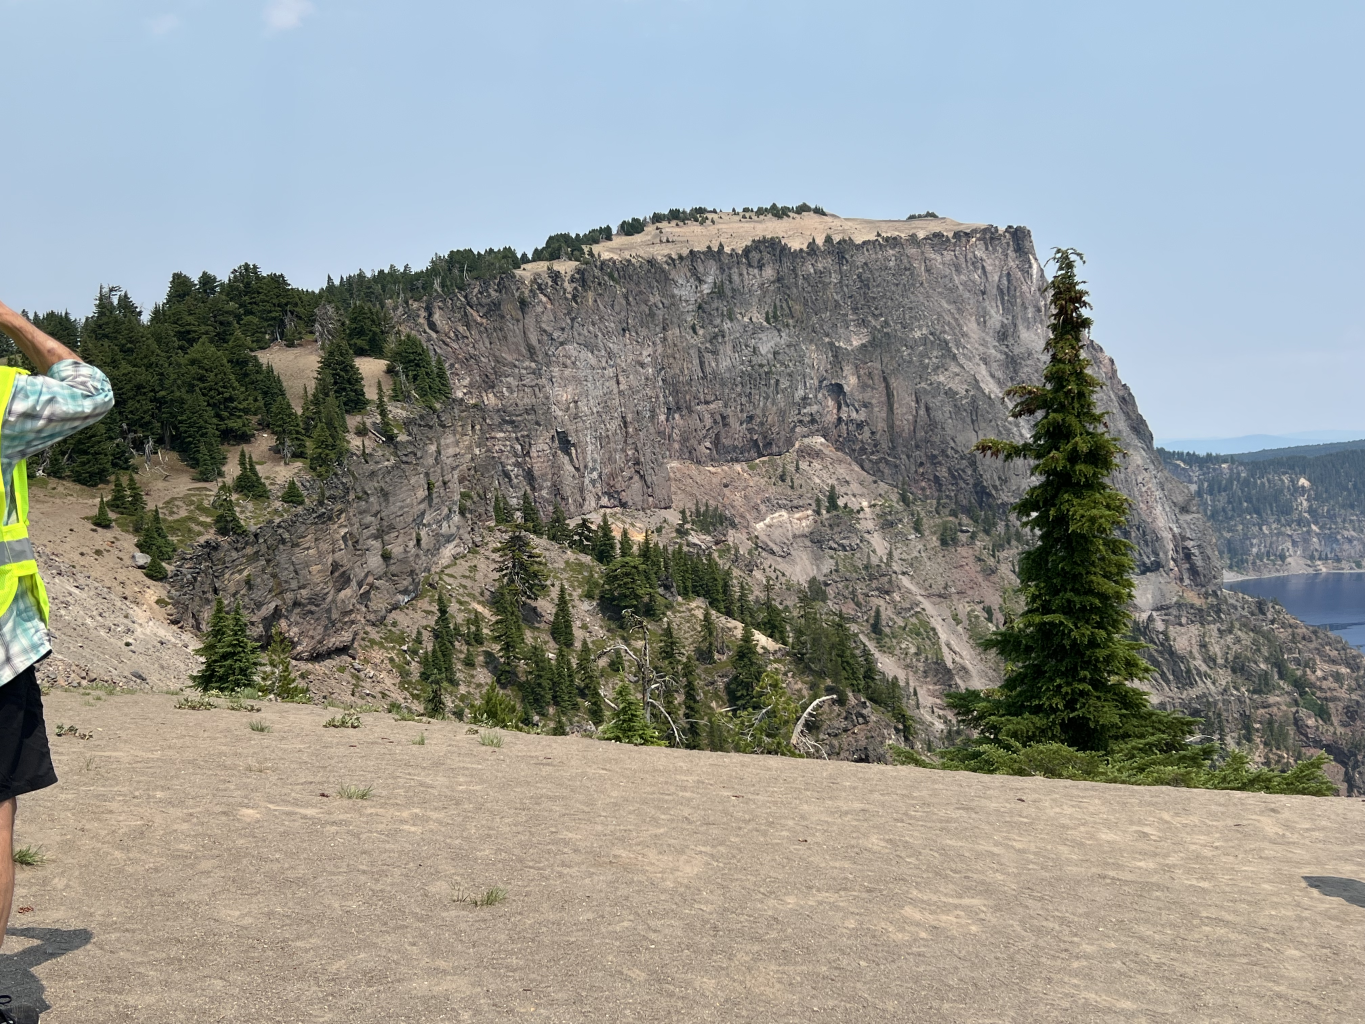  Stop 7 - Llao Rock Overlook. Llao Rock was a dacite flow that occurred just about 200 years before the climactic eruption. It consists of viscous, glassy rhyodacite.  